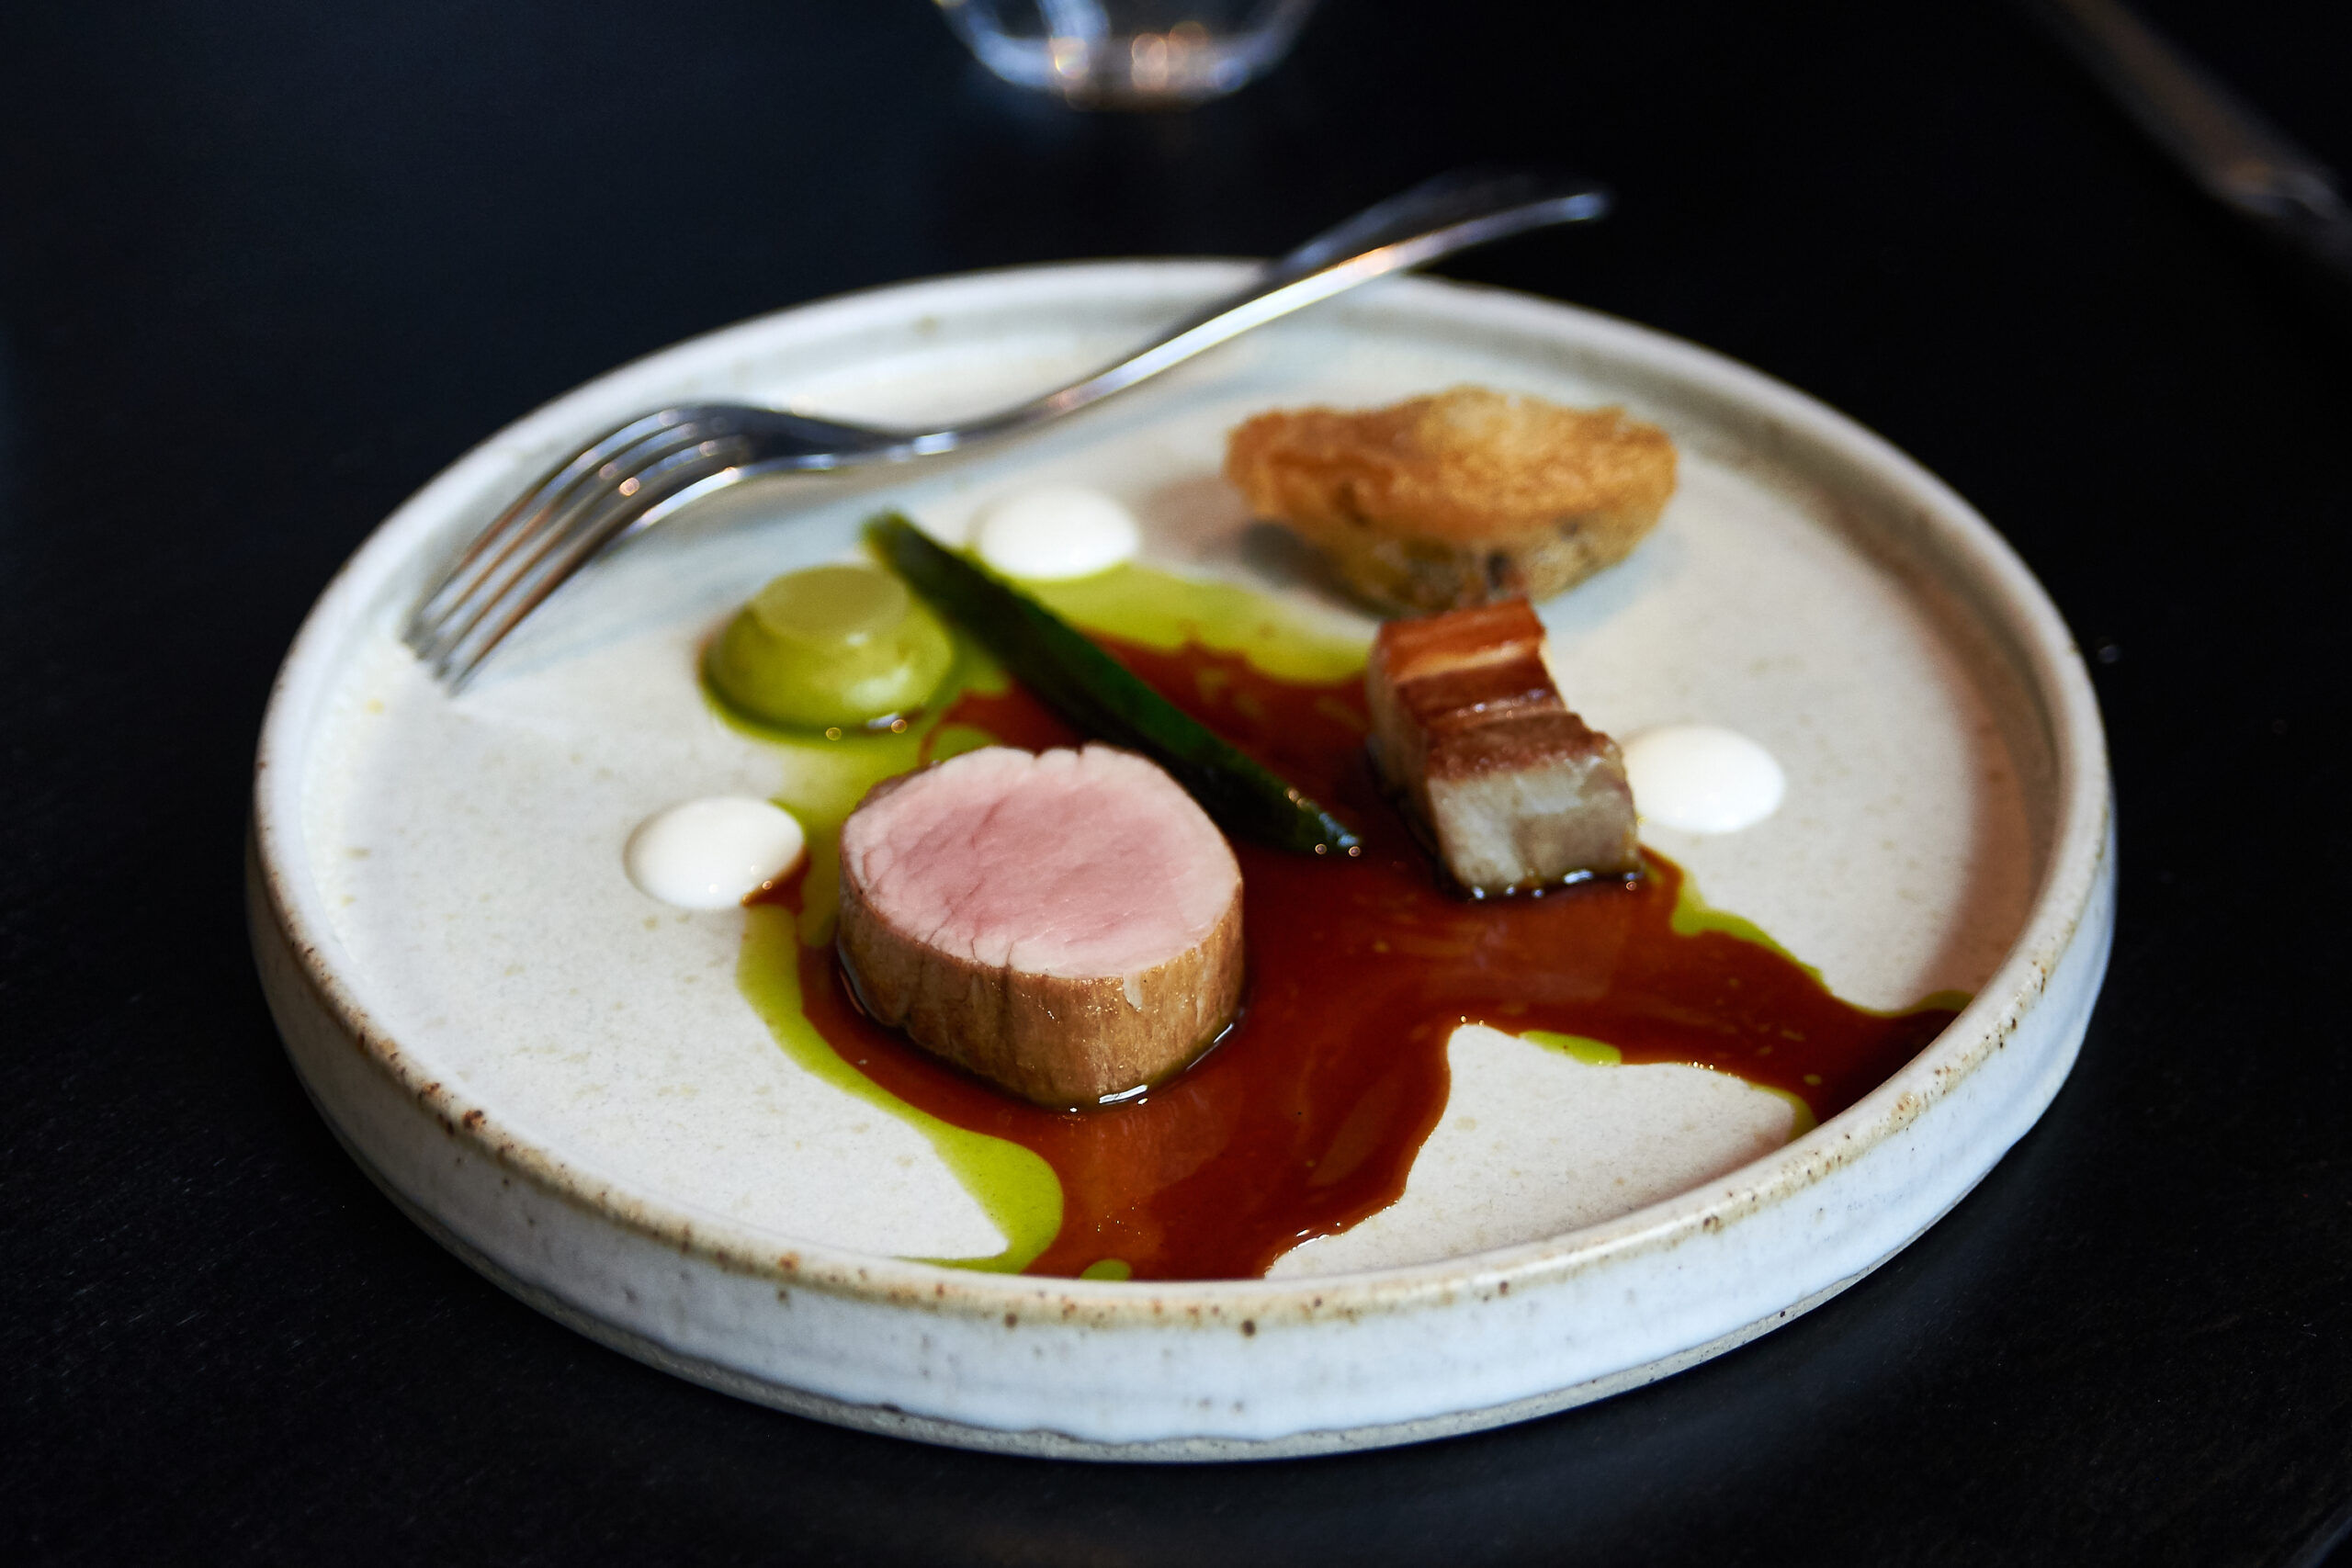 Pork served at etch. for the four-course lunch, with a fork sitting on the side of a white ceramic plate.